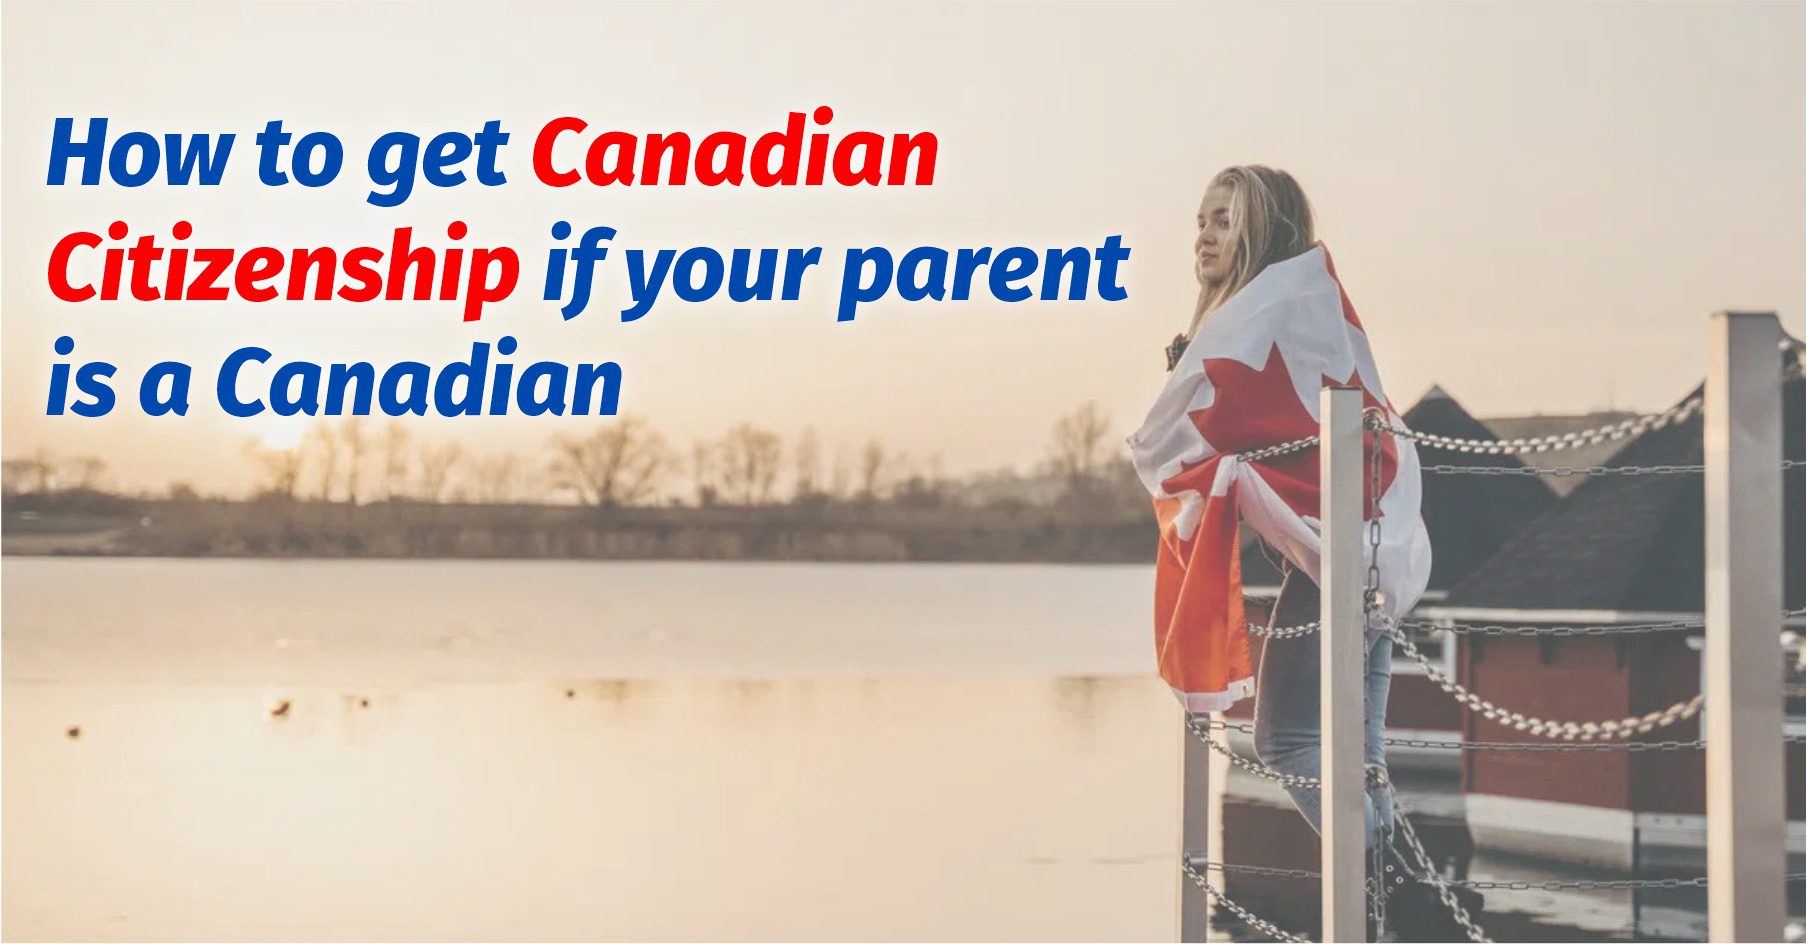 How to get Canadian citizenship if your parent is a Canadian